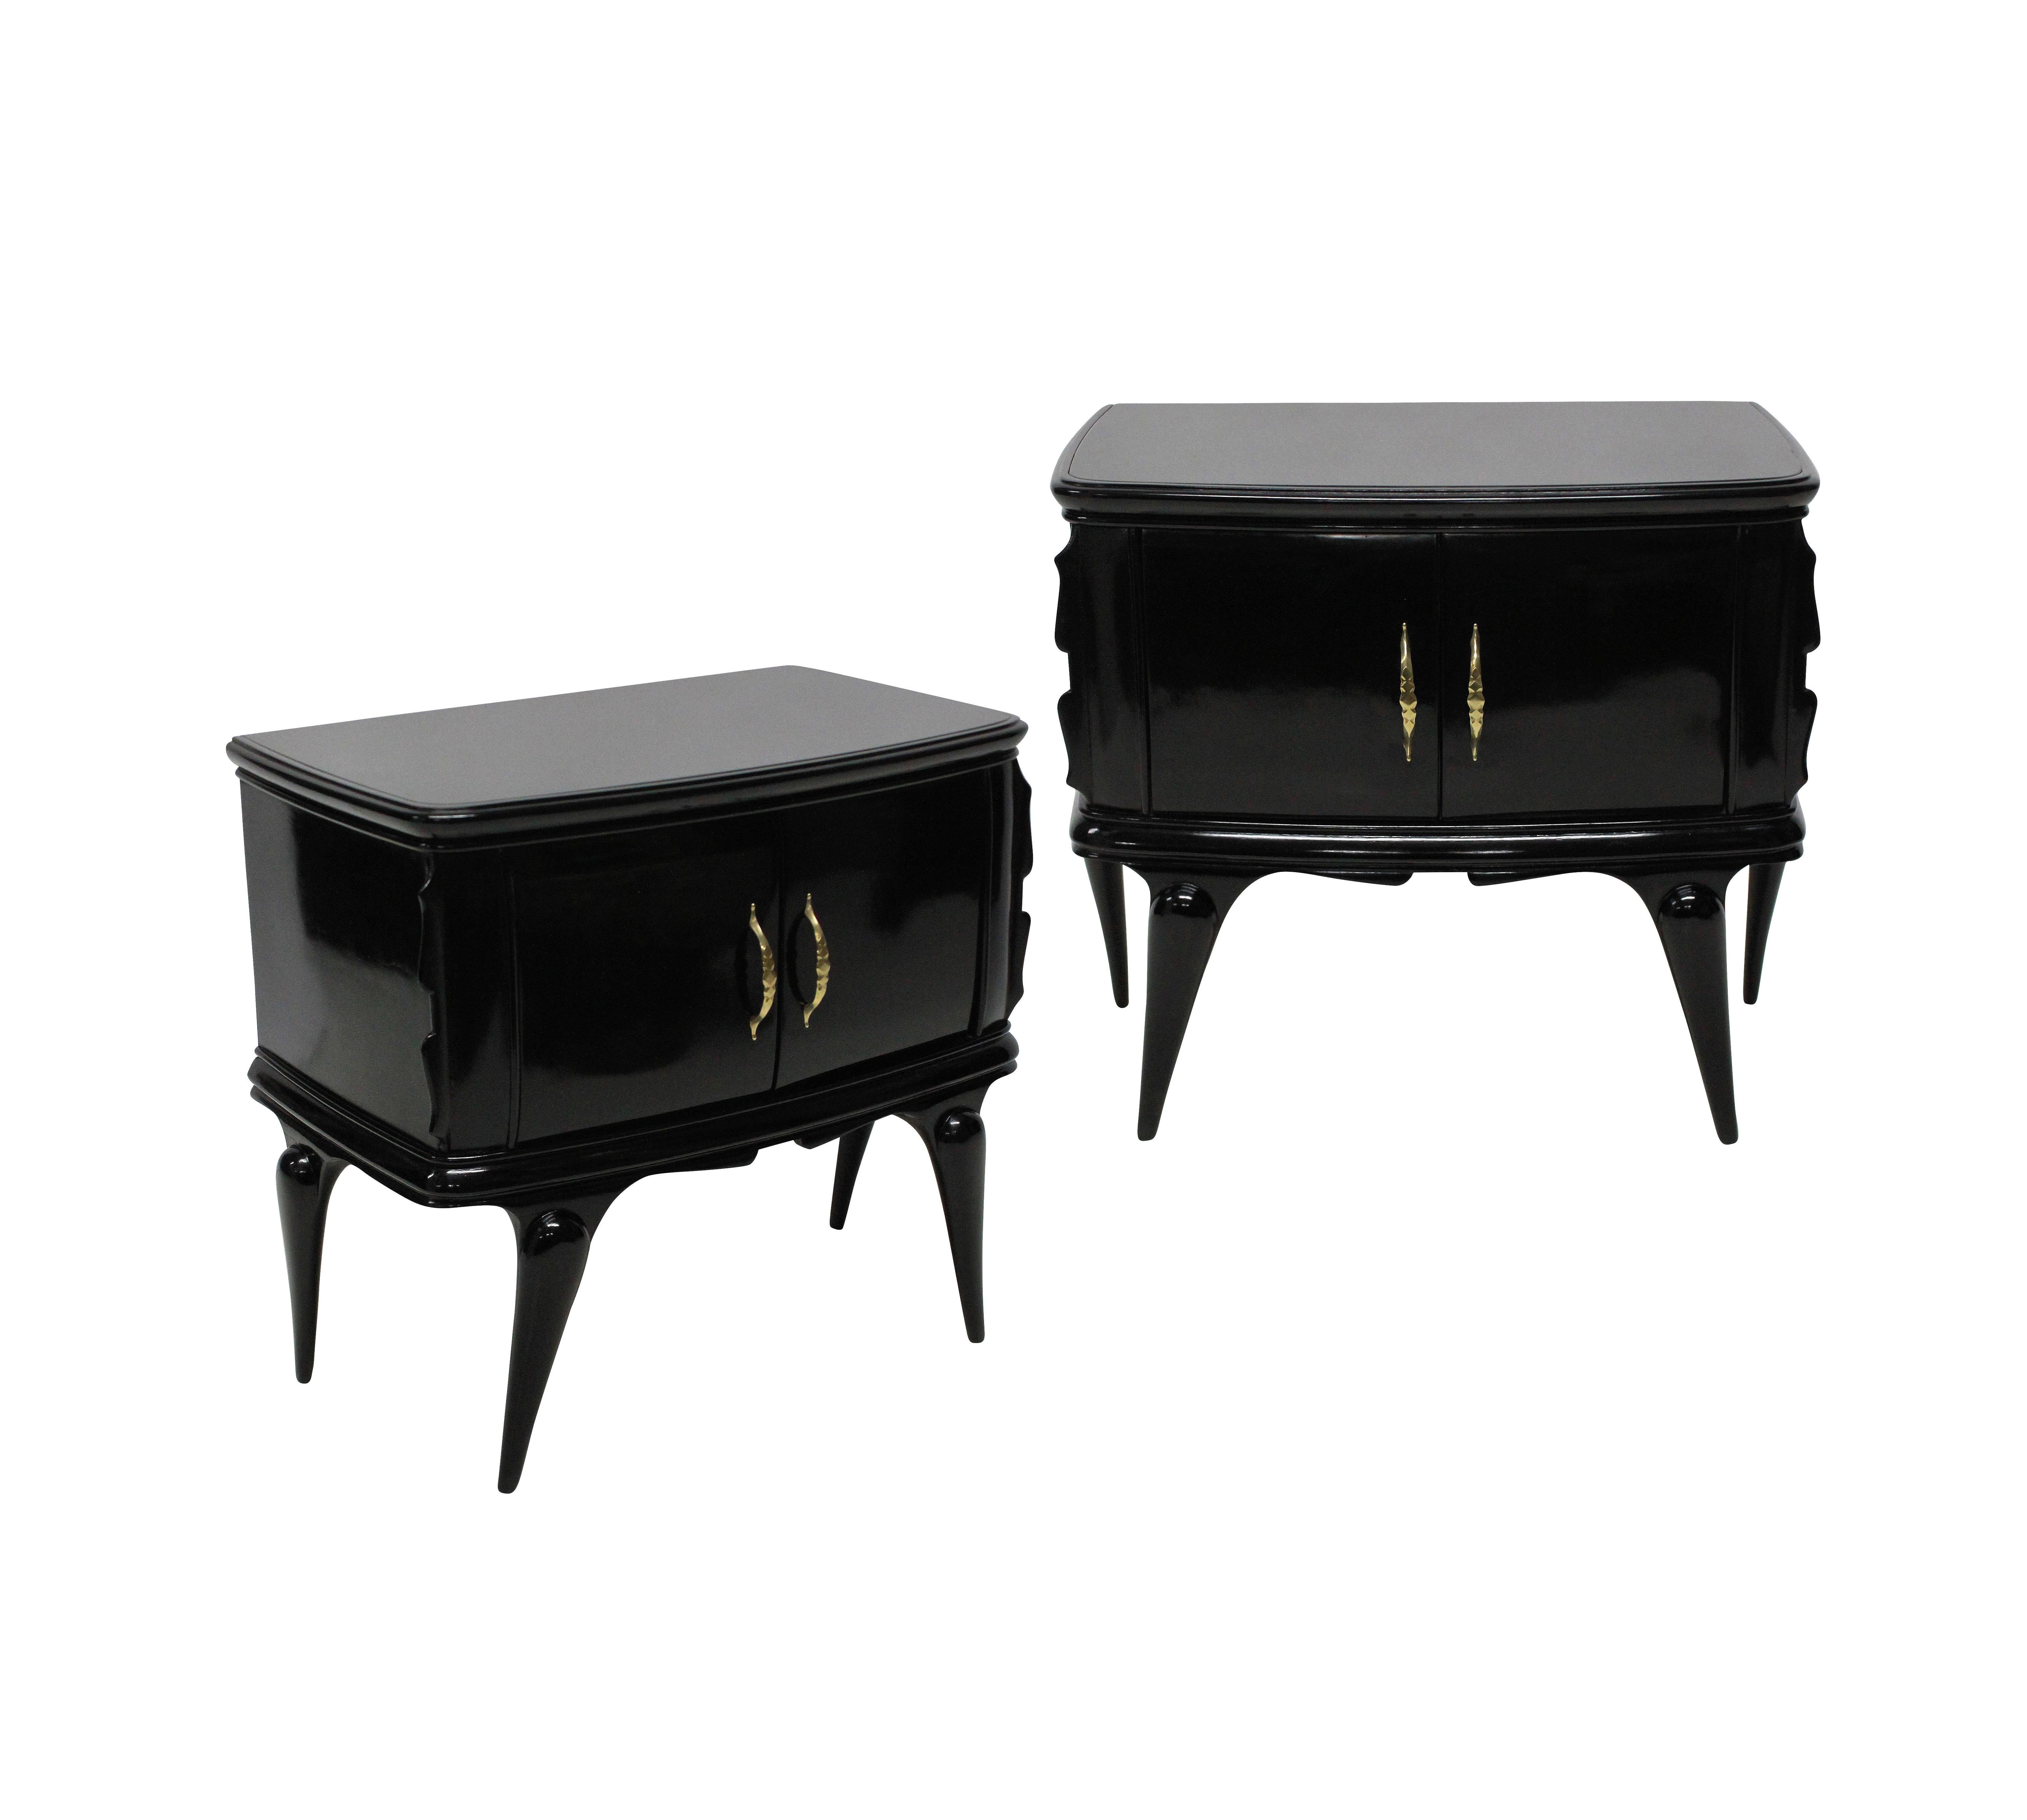 A pair of stylish Italian midcentury nightstands in ebonized wood with charcoal grey glass tops. Each with a central cupboard and two doors.